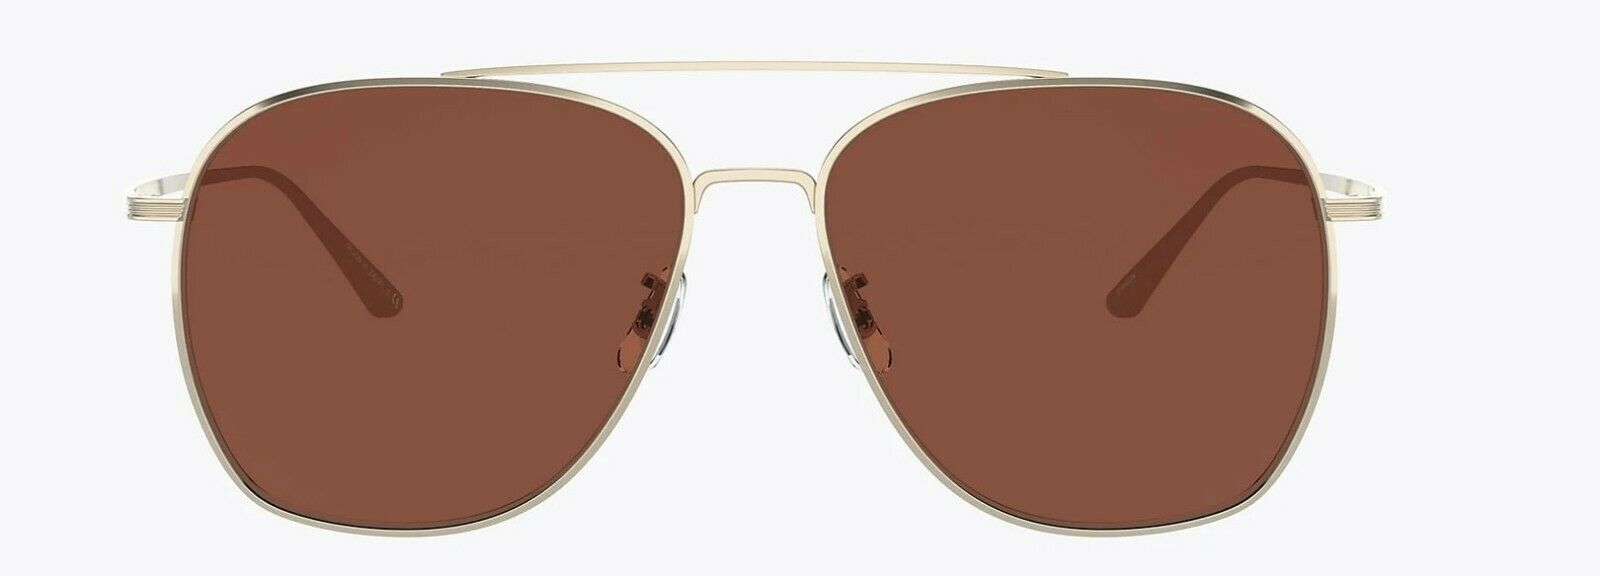 Oliver Peoples Sunglasses 1278ST 5292C5 The Row Ellerston Gold / Burgundy 58mm-827934450929-classypw.com-2